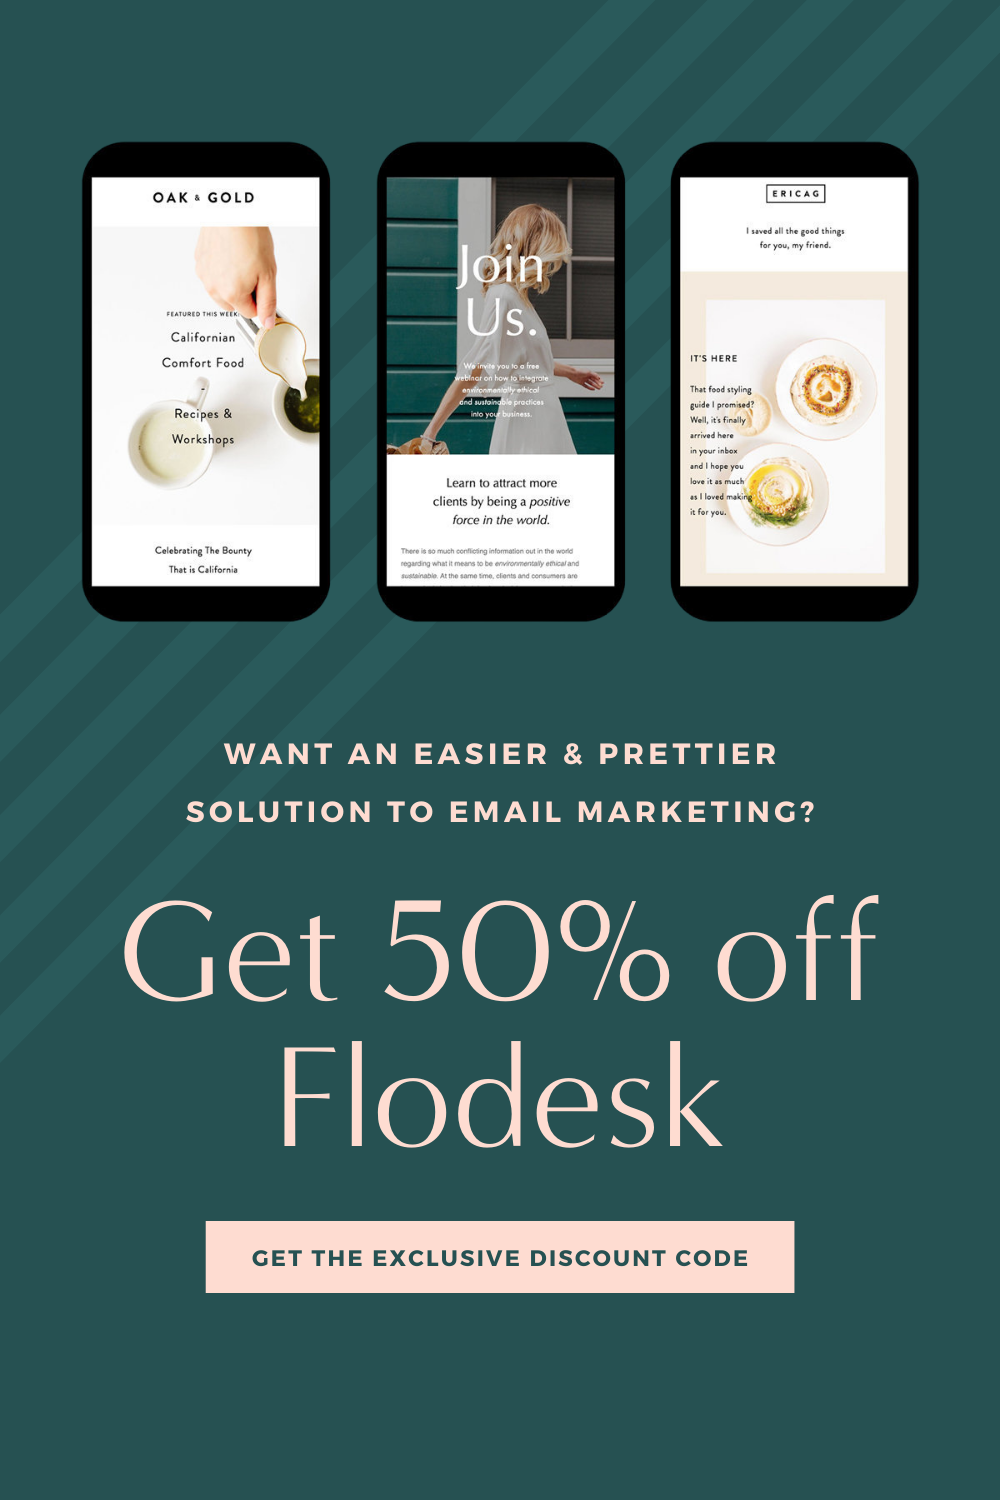 Your email marketing just got easier! Use code CANDICE50 to save 50% on Flodesk!